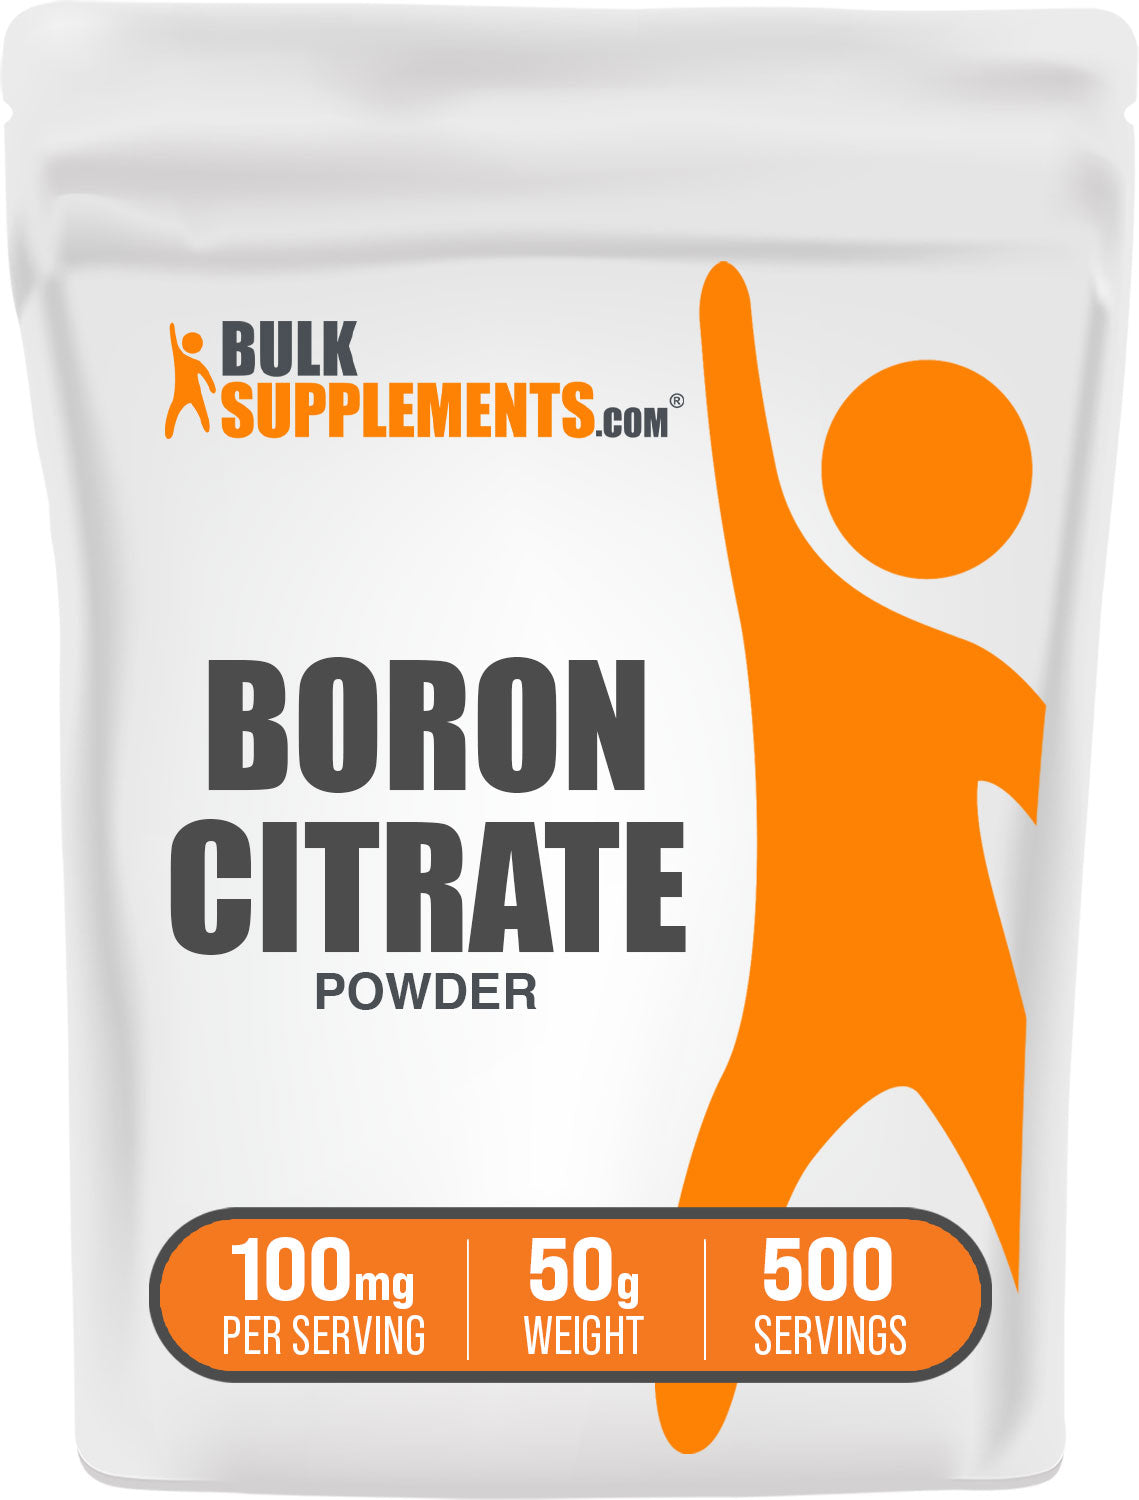 50g of boron citrate